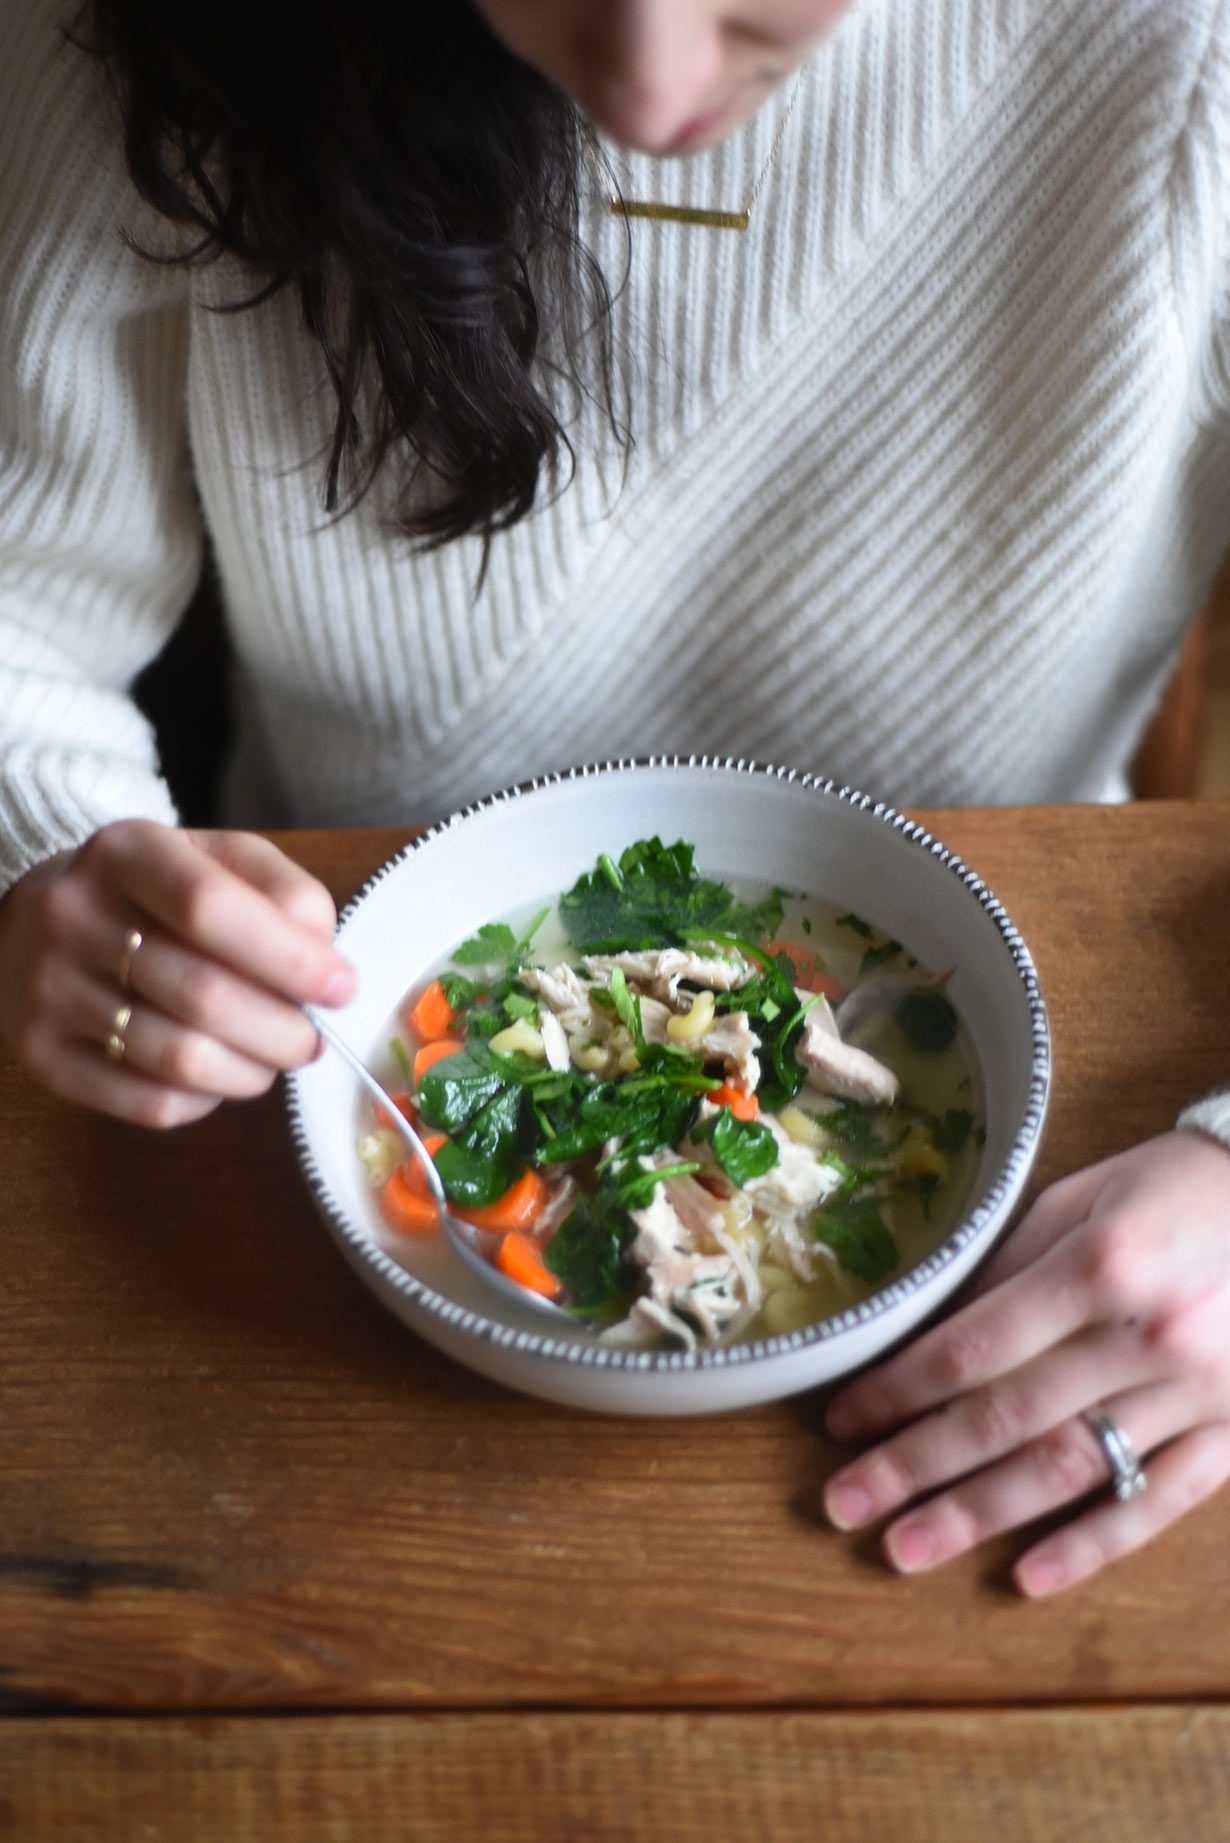 Turntable Kitchen shares a "master" recipe for really good chicken noodle soup